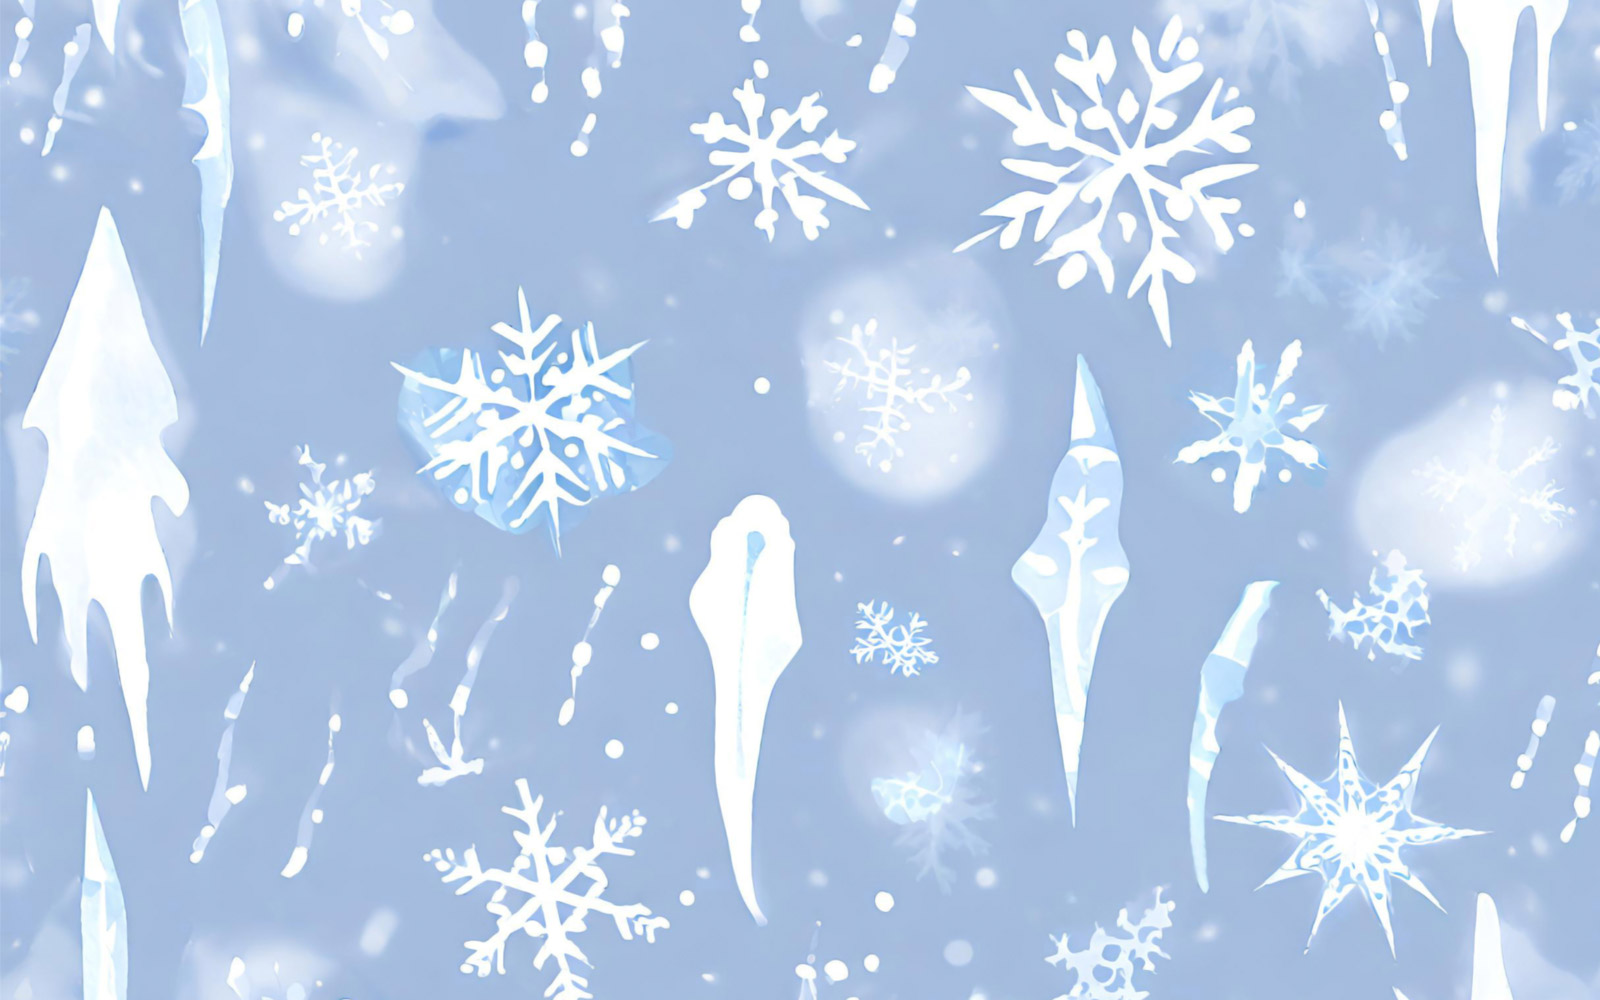 Snowflakes and icicles on blue background. Vector illustration